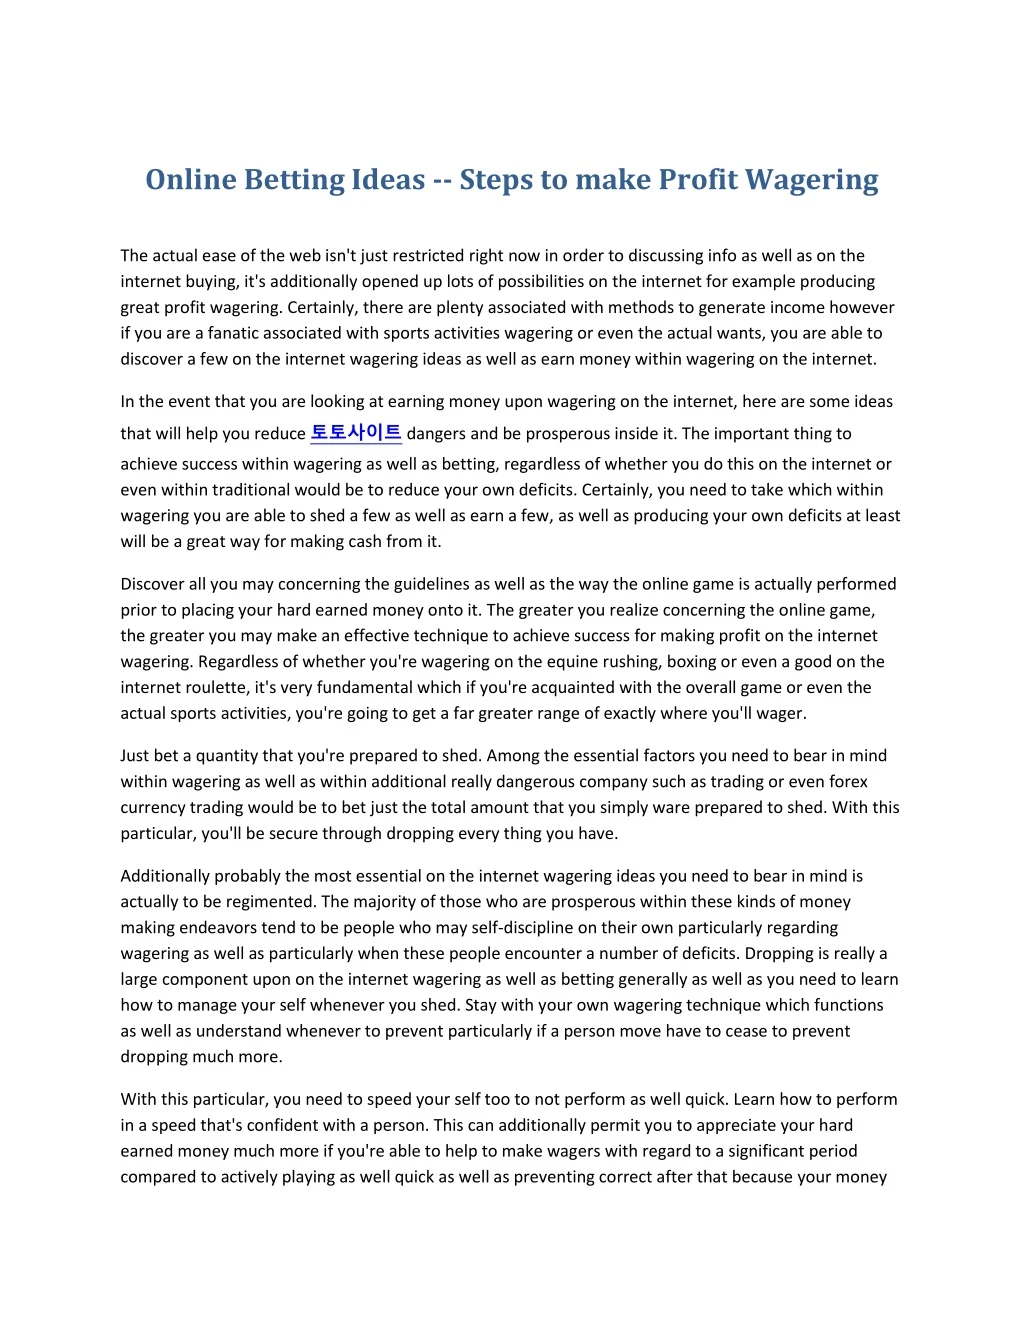 online betting ideas steps to make profit wagering